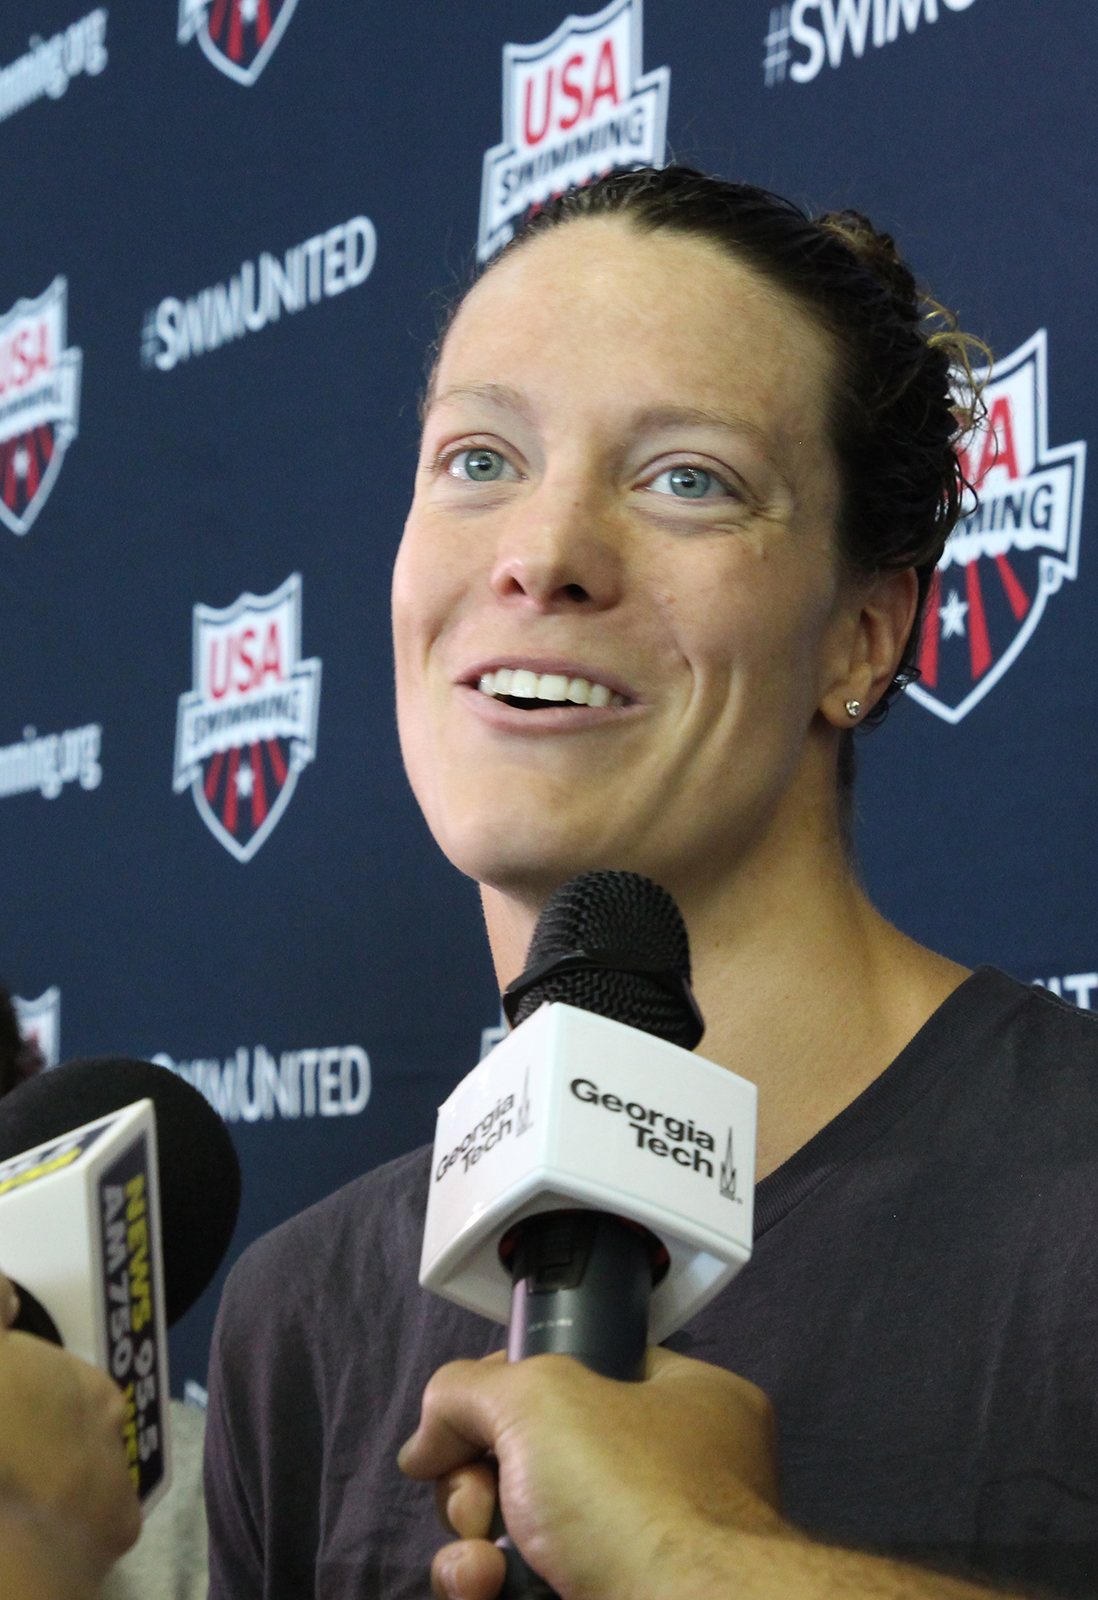 Amanda Weir talks with media at an open practice session at Georgia Tech's McAuley Aquatic Center on July 30, 2016